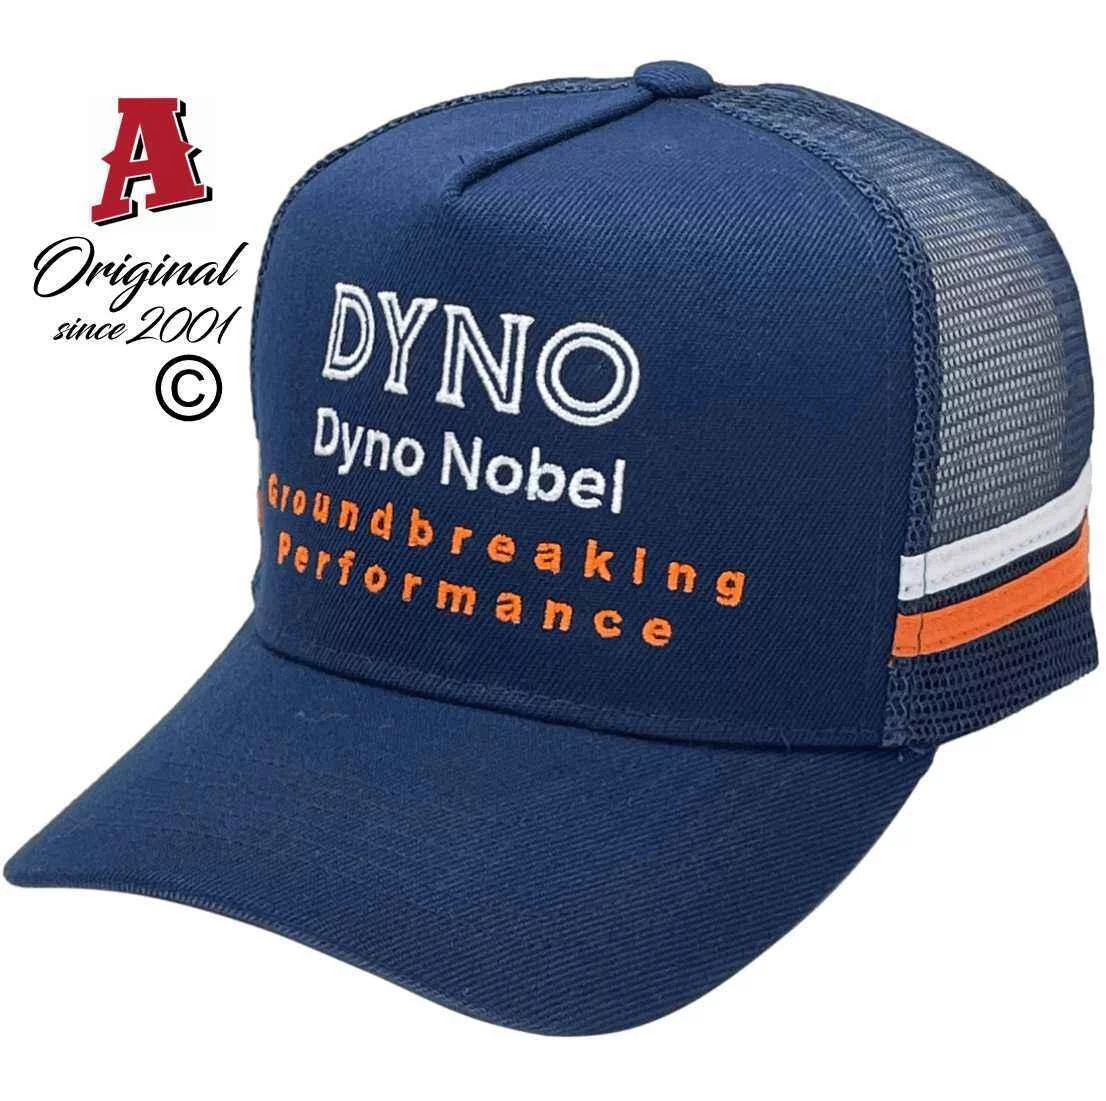 Dyno Noble Murarrie QLD Basic Aussie Trucker Hats with Double SideBands and Australian HeadFit Crown Navy White Orange